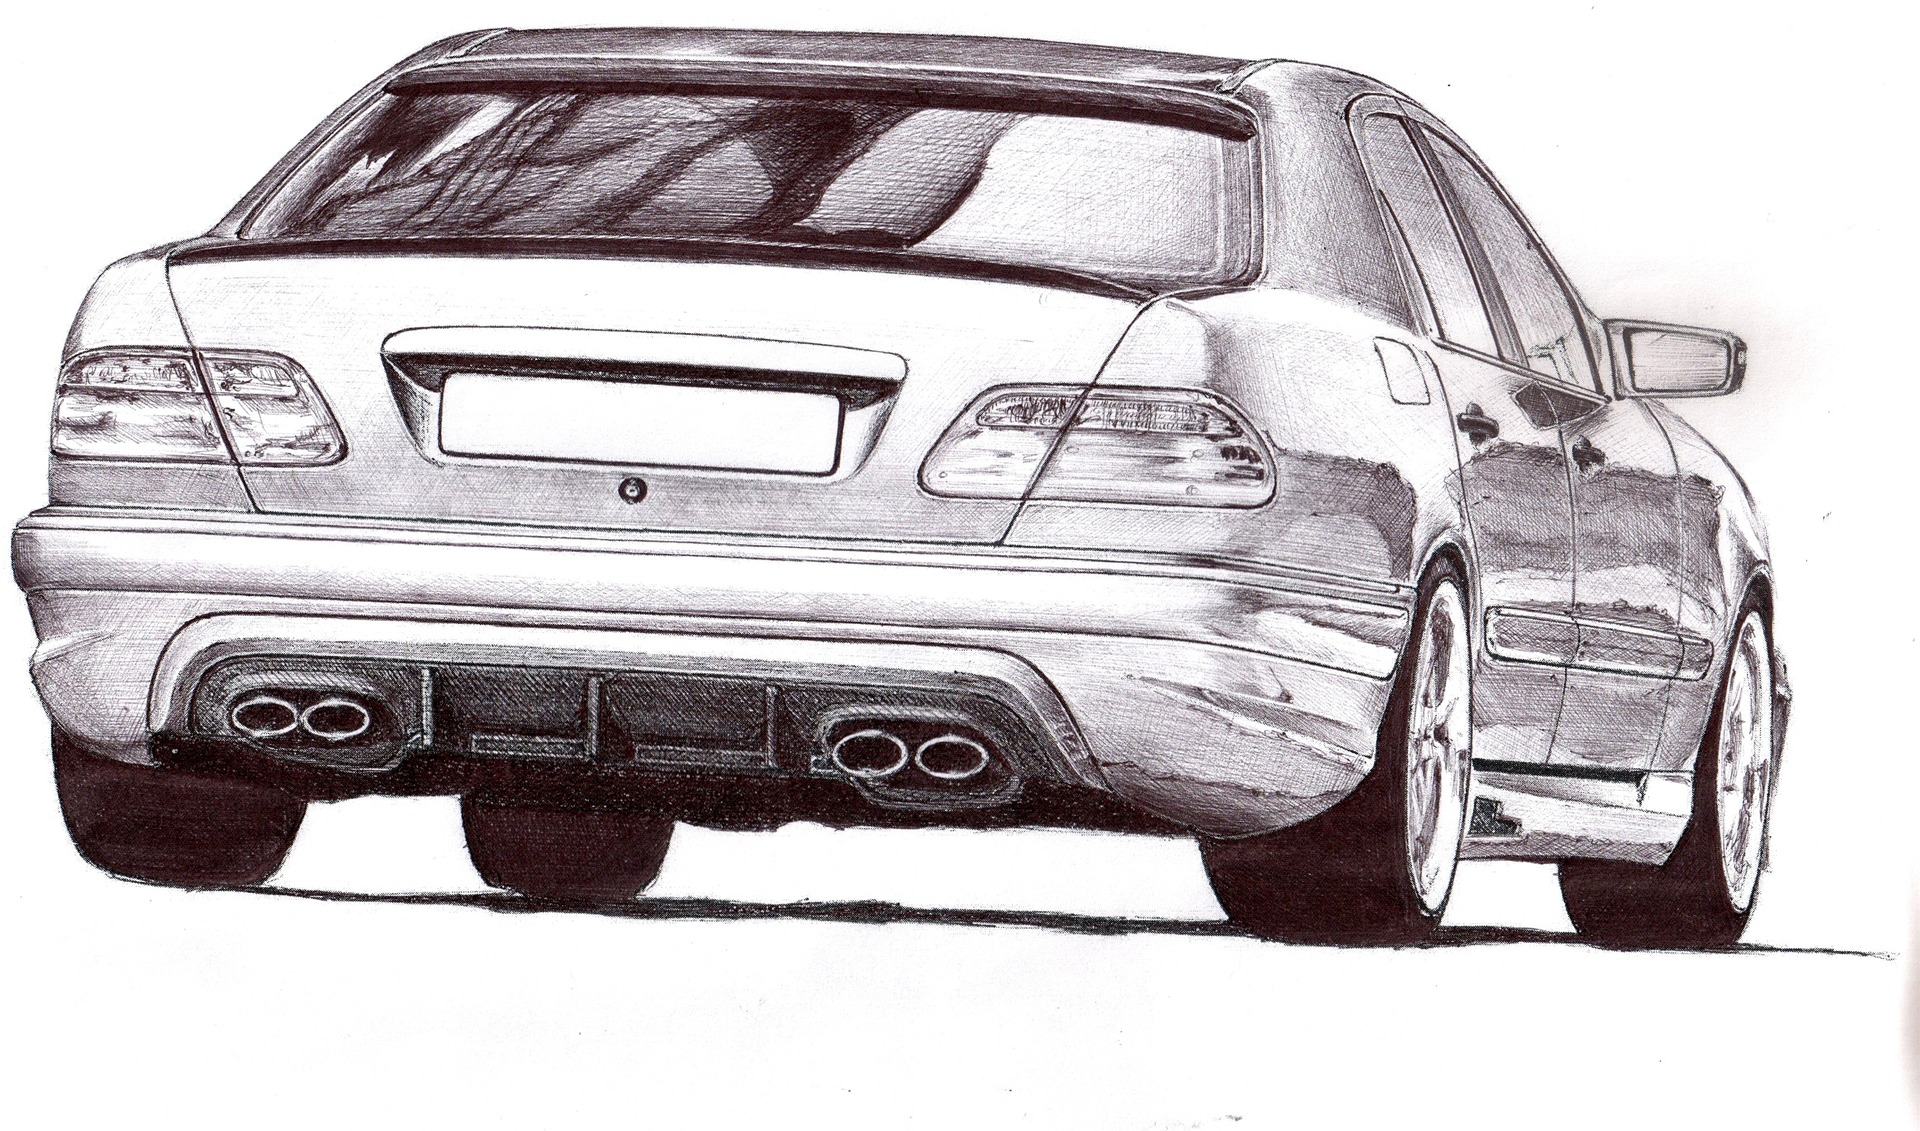 Mercedes Benz w210 drawing